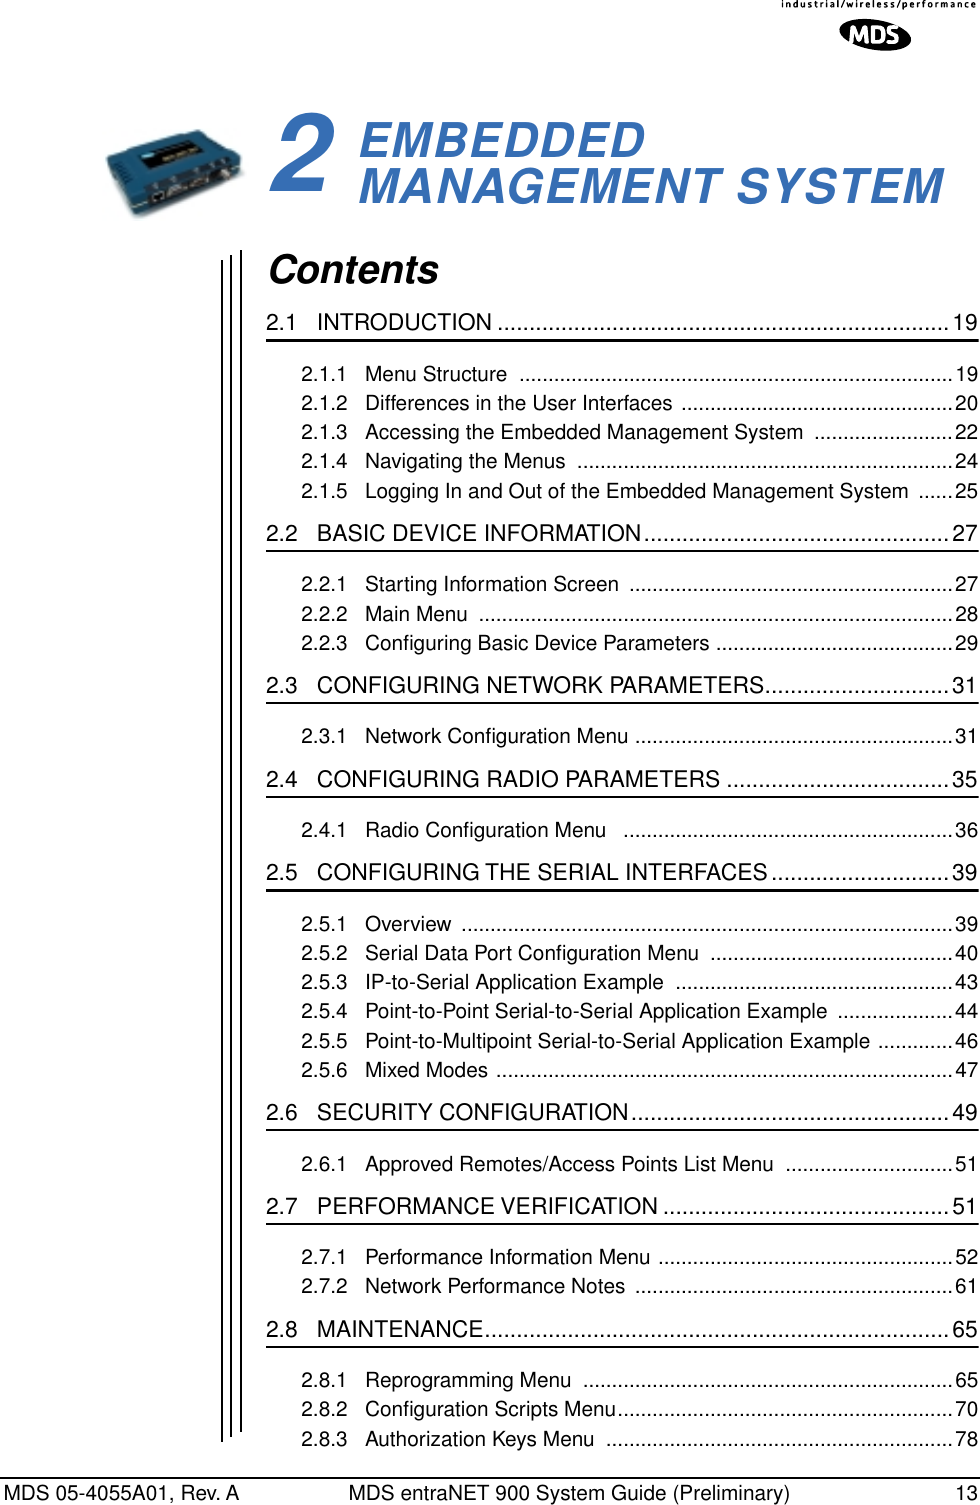 MDS 05-4055A01, Rev. A MDS entraNET 900 System Guide (Preliminary) 132EMBEDDED MANAGEMENT SYSTEM2 Chapter Counter Reset ParagraphContents2.1   INTRODUCTION .......................................................................192.1.1   Menu Structure  ...........................................................................192.1.2   Differences in the User Interfaces ...............................................202.1.3   Accessing the Embedded Management System  ........................222.1.4   Navigating the Menus  .................................................................242.1.5   Logging In and Out of the Embedded Management System  ......252.2   BASIC DEVICE INFORMATION................................................272.2.1   Starting Information Screen  ........................................................272.2.2   Main Menu  ..................................................................................282.2.3   Conﬁguring Basic Device Parameters .........................................292.3   CONFIGURING NETWORK PARAMETERS.............................312.3.1   Network Conﬁguration Menu .......................................................312.4   CONFIGURING RADIO PARAMETERS ...................................352.4.1   Radio Conﬁguration Menu   .........................................................362.5   CONFIGURING THE SERIAL INTERFACES............................392.5.1   Overview  .....................................................................................392.5.2   Serial Data Port Conﬁguration Menu  ..........................................402.5.3   IP-to-Serial Application Example  ................................................432.5.4   Point-to-Point Serial-to-Serial Application Example  ....................442.5.5   Point-to-Multipoint Serial-to-Serial Application Example .............462.5.6   Mixed Modes ...............................................................................472.6   SECURITY CONFIGURATION..................................................492.6.1   Approved Remotes/Access Points List Menu  .............................512.7   PERFORMANCE VERIFICATION .............................................512.7.1   Performance Information Menu ...................................................522.7.2   Network Performance Notes  .......................................................612.8   MAINTENANCE.........................................................................652.8.1   Reprogramming Menu  ................................................................652.8.2   Conﬁguration Scripts Menu..........................................................702.8.3   Authorization Keys Menu  ............................................................78